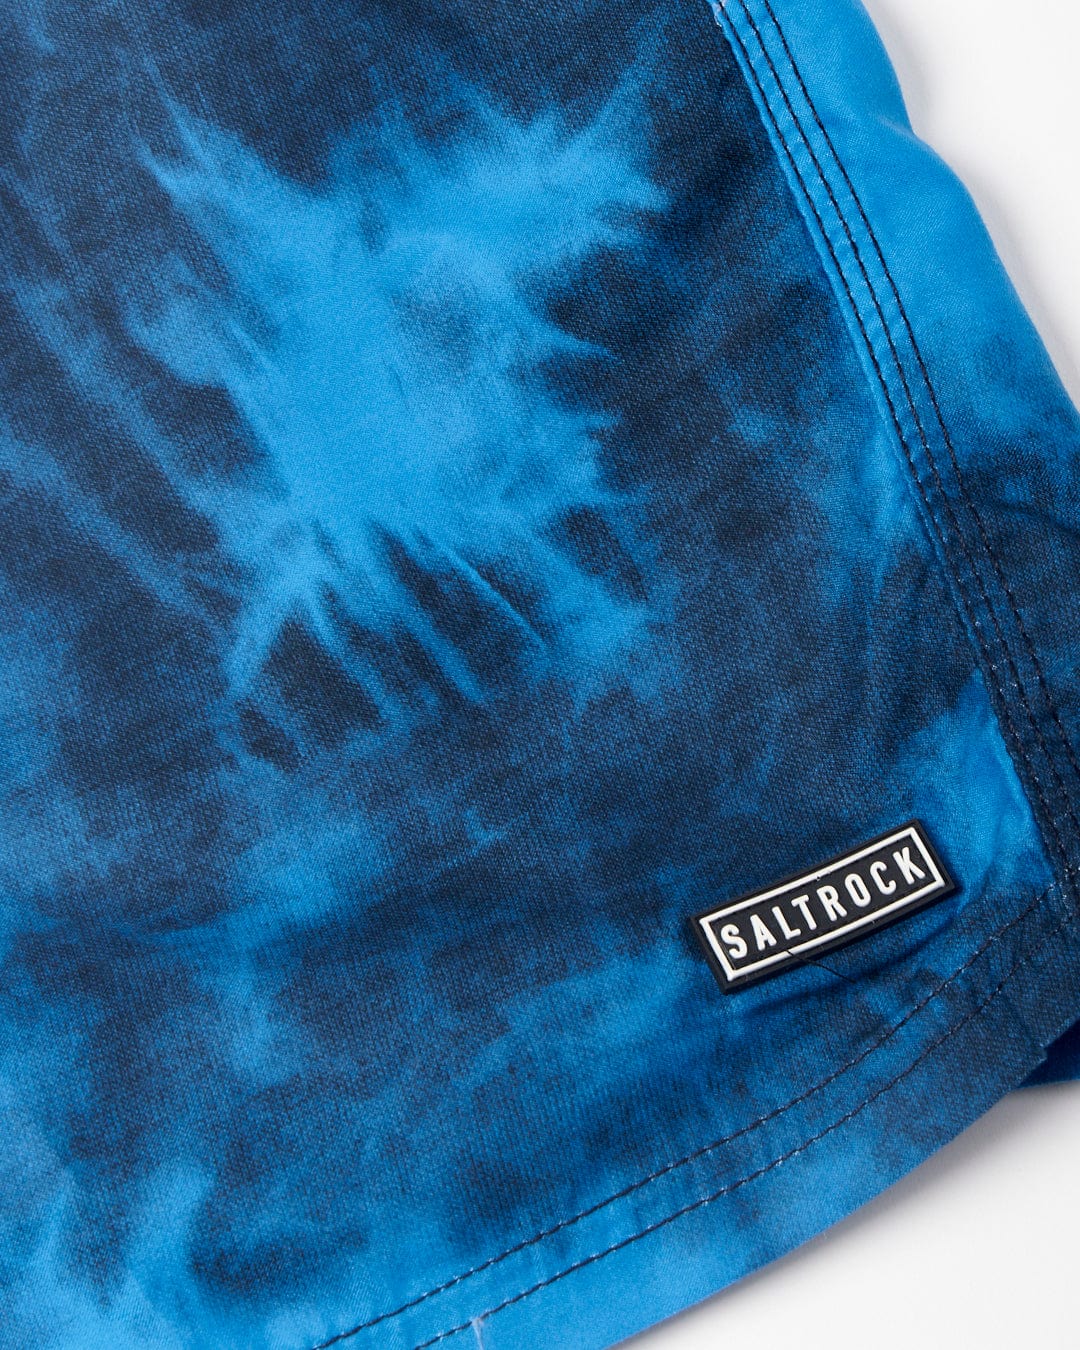 Close-up of a Lee - Mens Tie Dye Swimshorts - Blue fabric with a Saltrock logo tag.